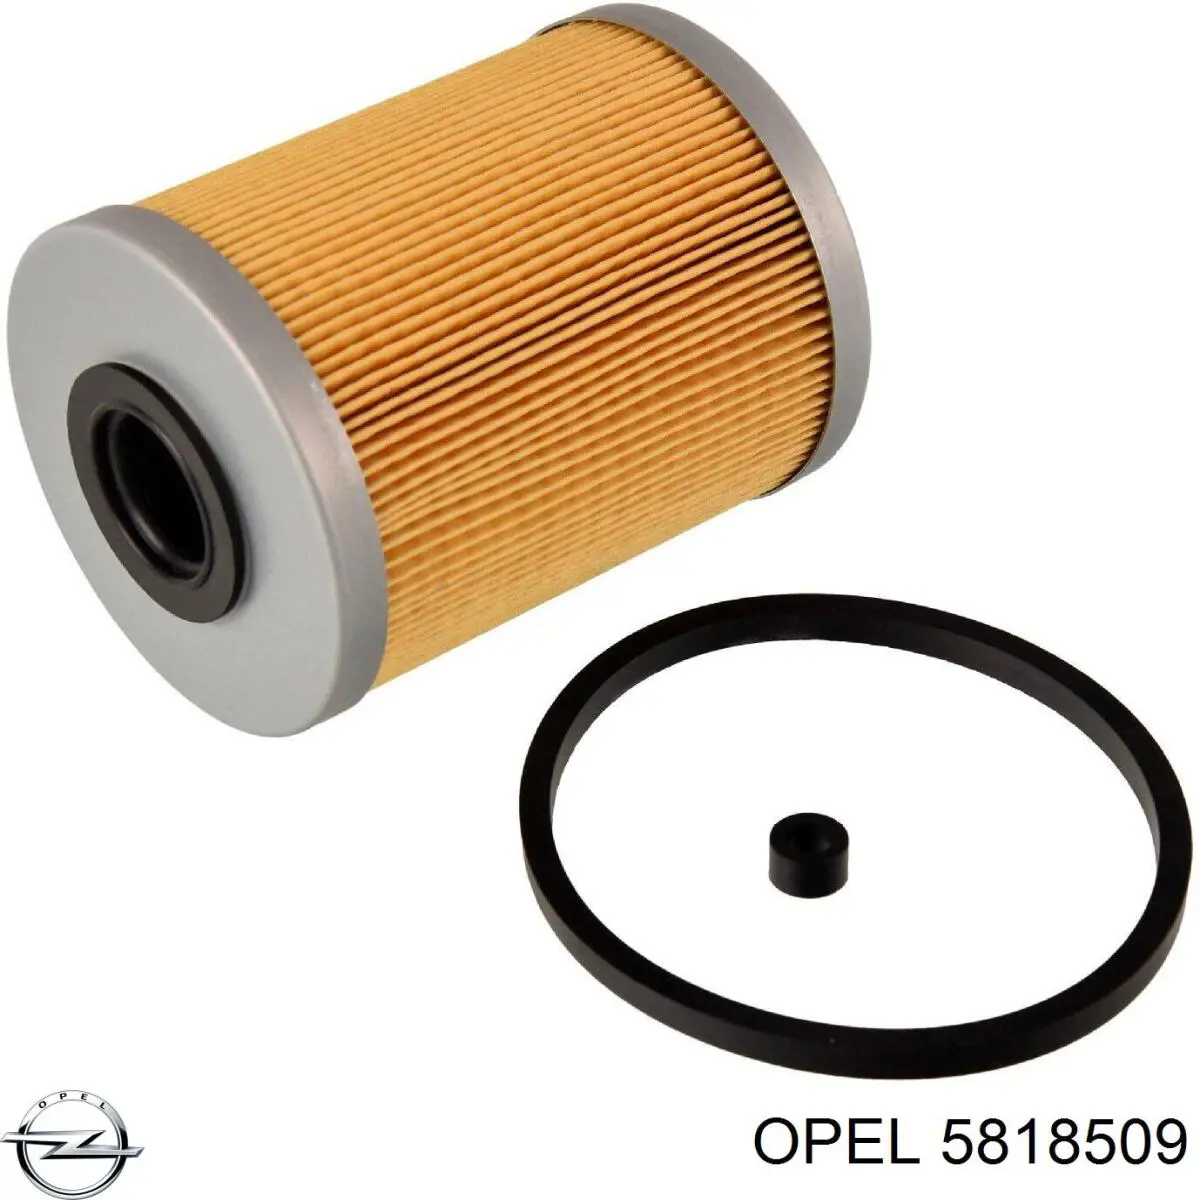 5818509 Opel filtro combustible